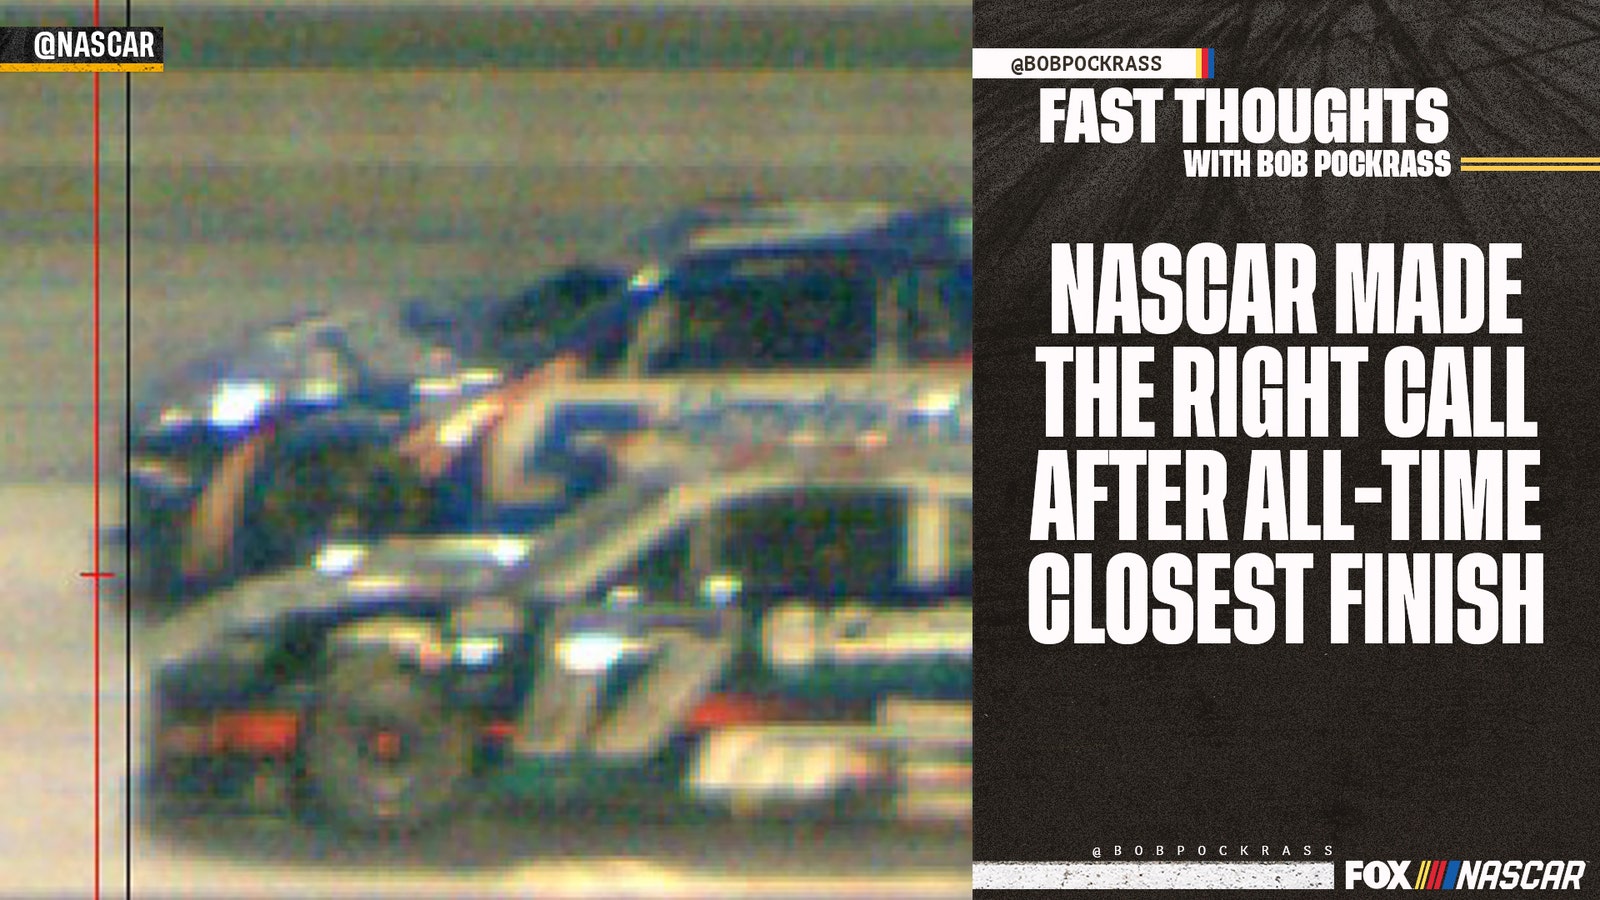 NASCAR made the right call after the all-time closest finish